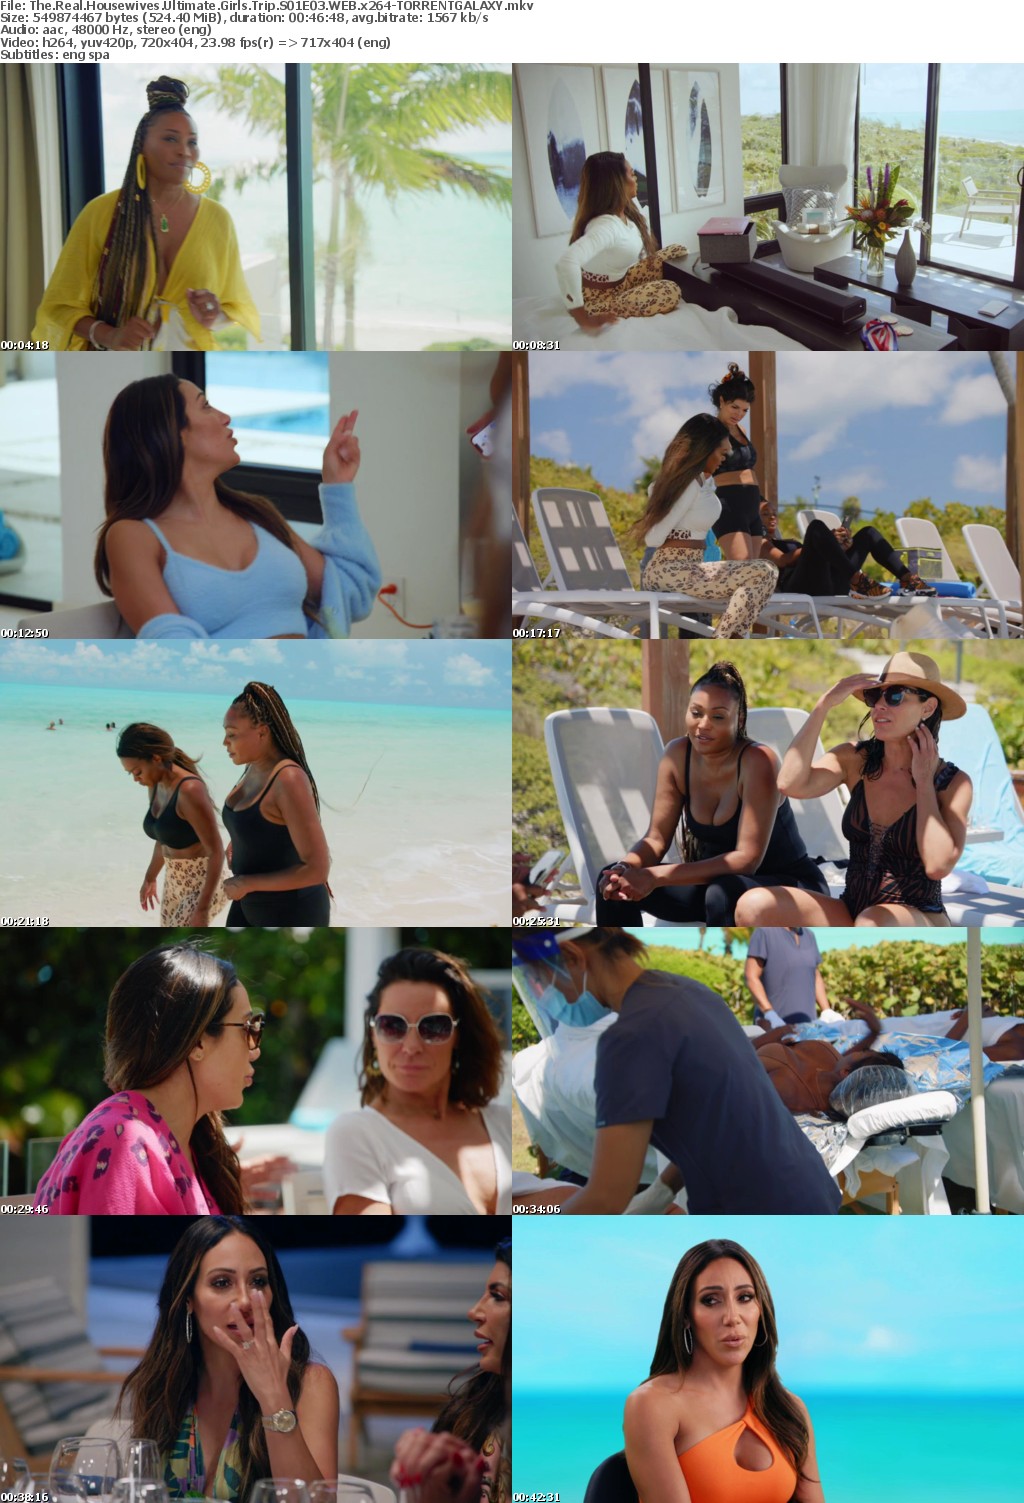 The Real Housewives Ultimate Girls Trip S01E03 WEB x264-GALAXY